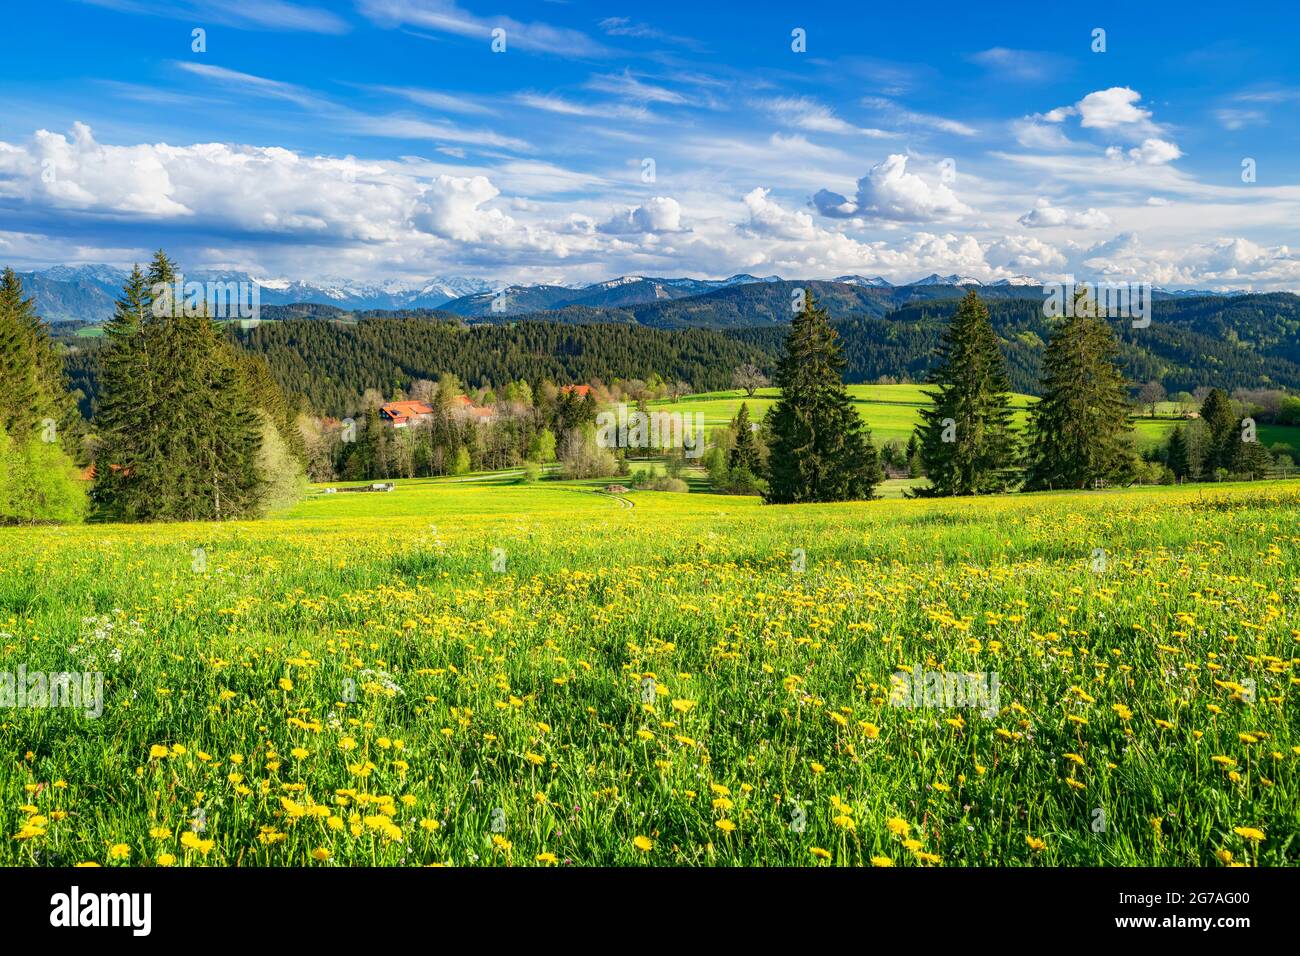 Flower meadow with yellow dandelions, forests and hills under a blue sky and clouds on a sunny day in the Allgäu. In the background the snow-covered Allgäu Alps. Bavaria, Germany, Europe Stock Photo